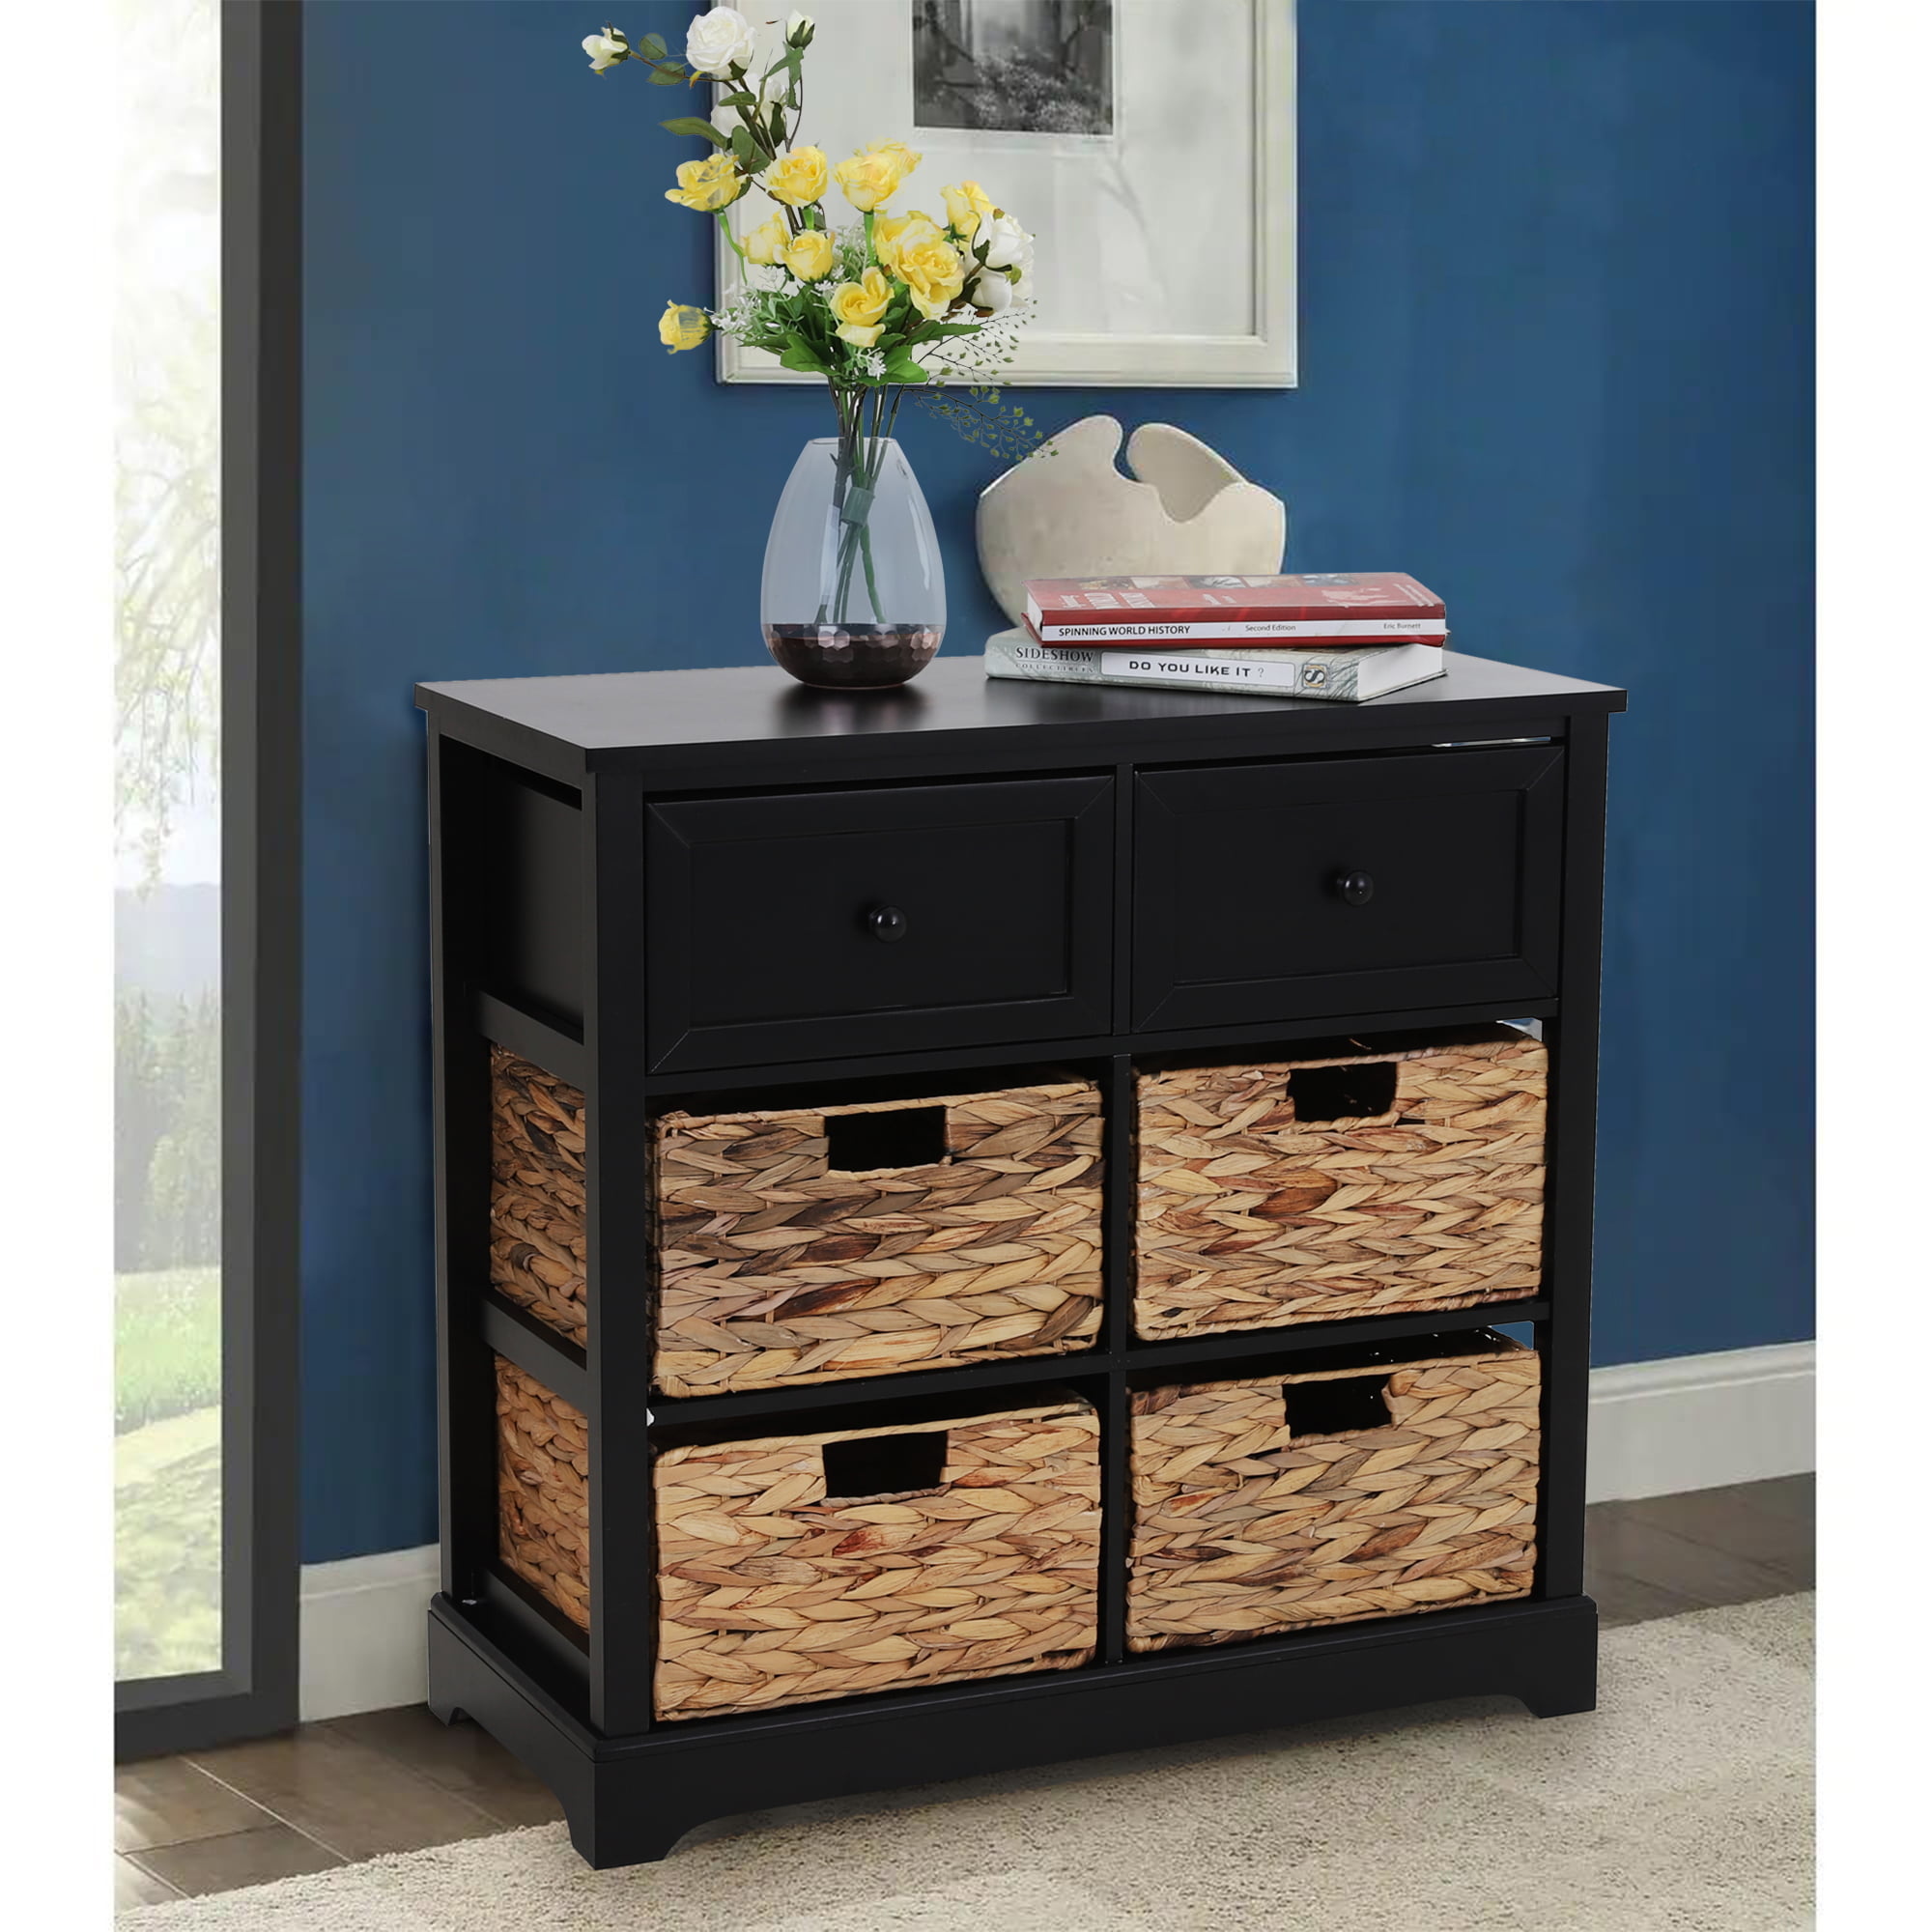 Sophia & William Accent Storage Cabinet with 1 Drawer and 3 Removable Water  Hyacinth Baskets, 4-Tier Tall Vertical Dresser Tower Unit, Black